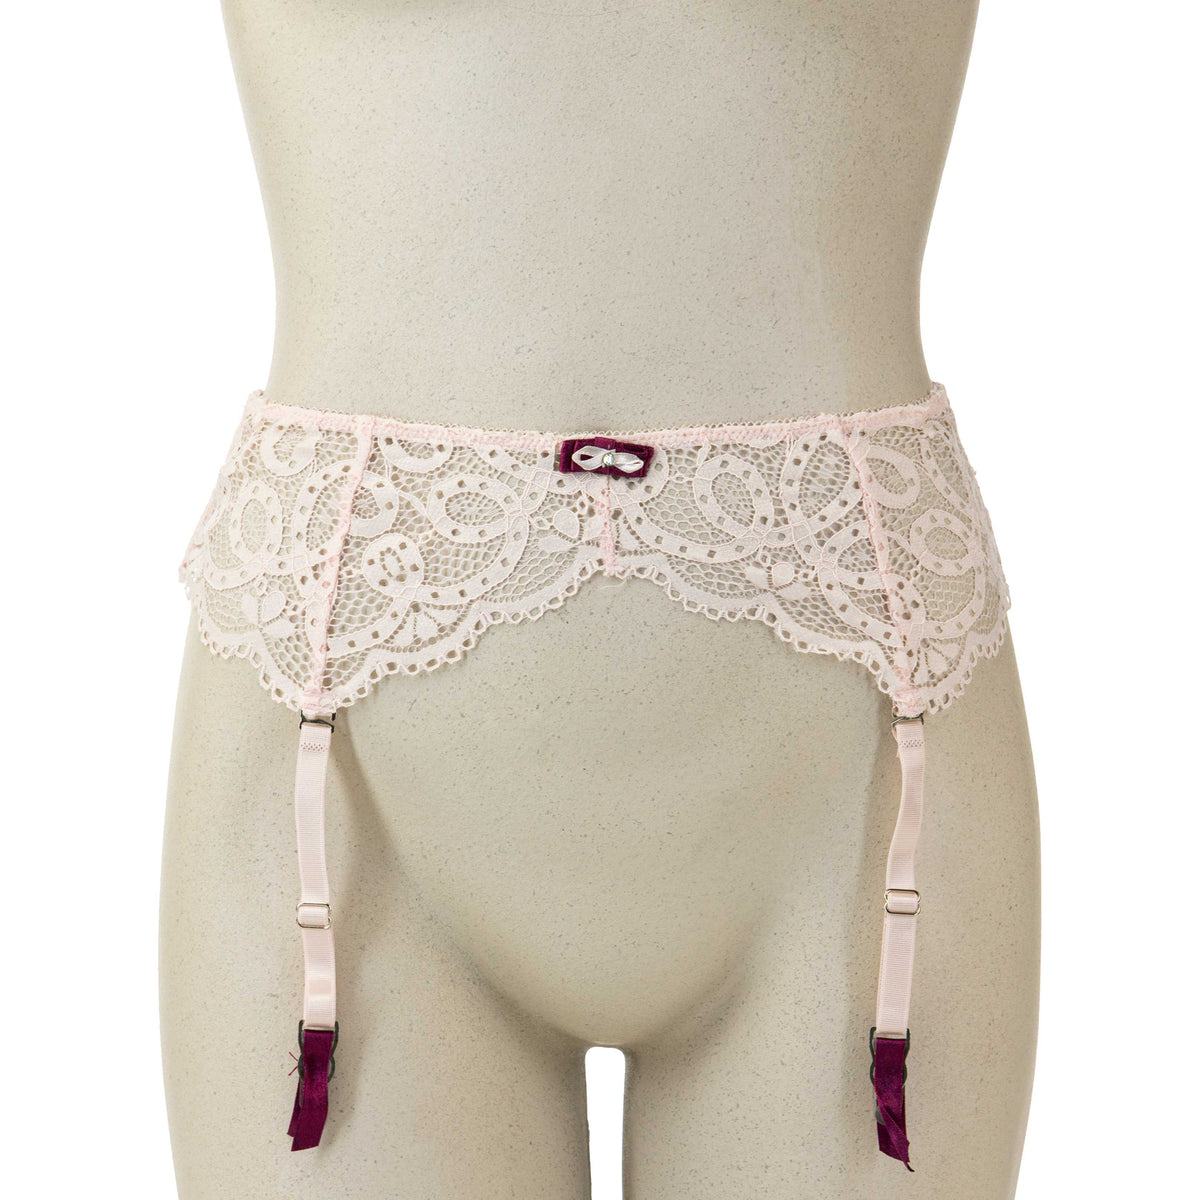 Sophie B - Delicate Lace Garter - Pink - Small